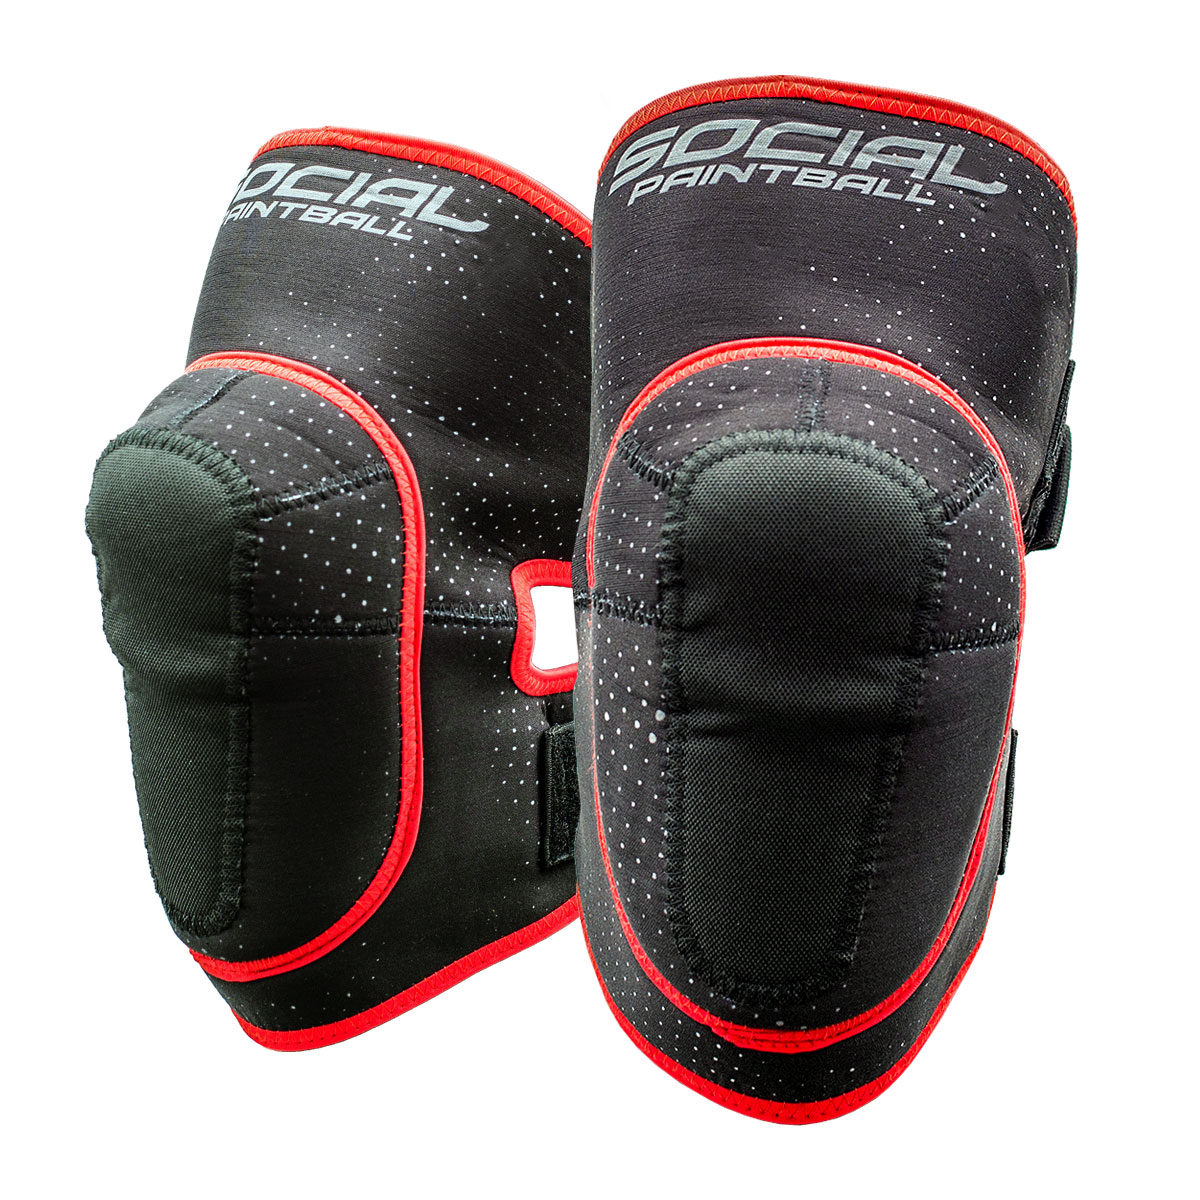 Paintball SMPL Knee Pads, Black Red - Social Paintball